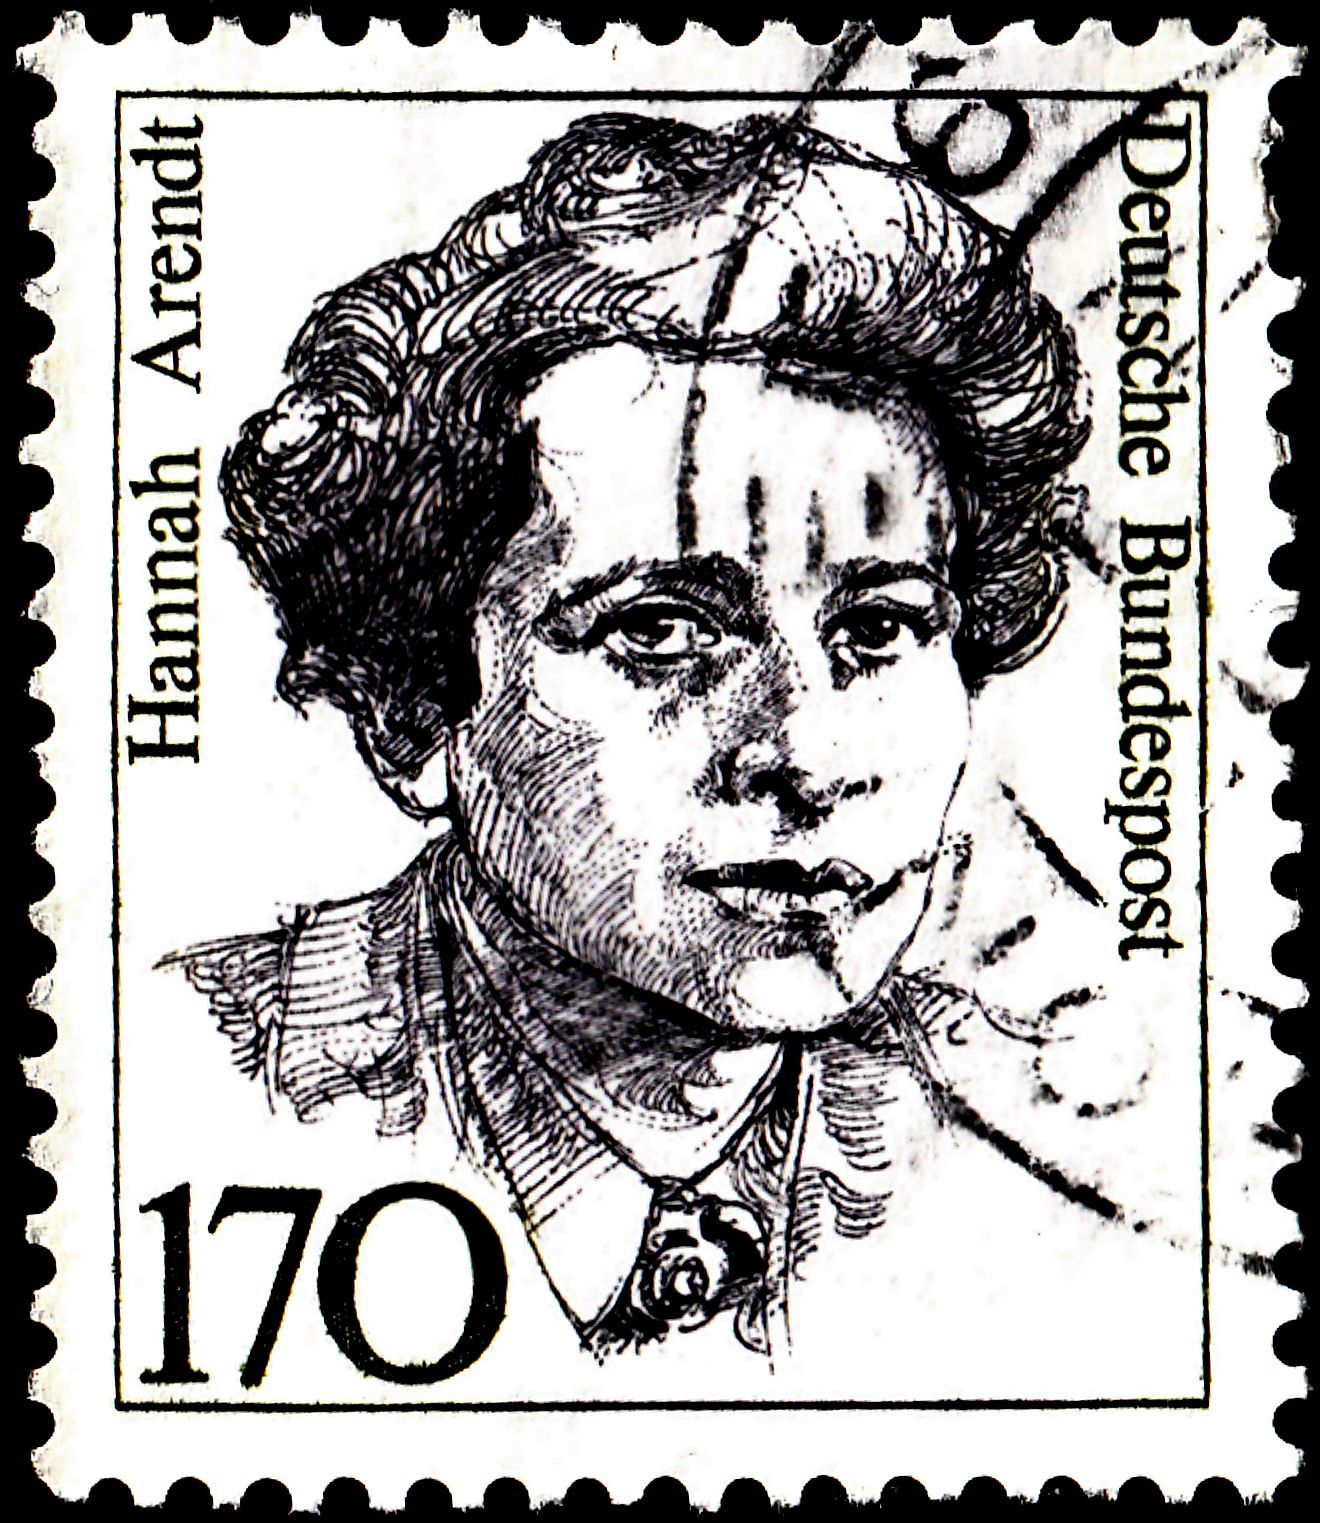 postage-stamp-showing-hannah-arendt-by-a-marino-via-shutterstock-com.jpg